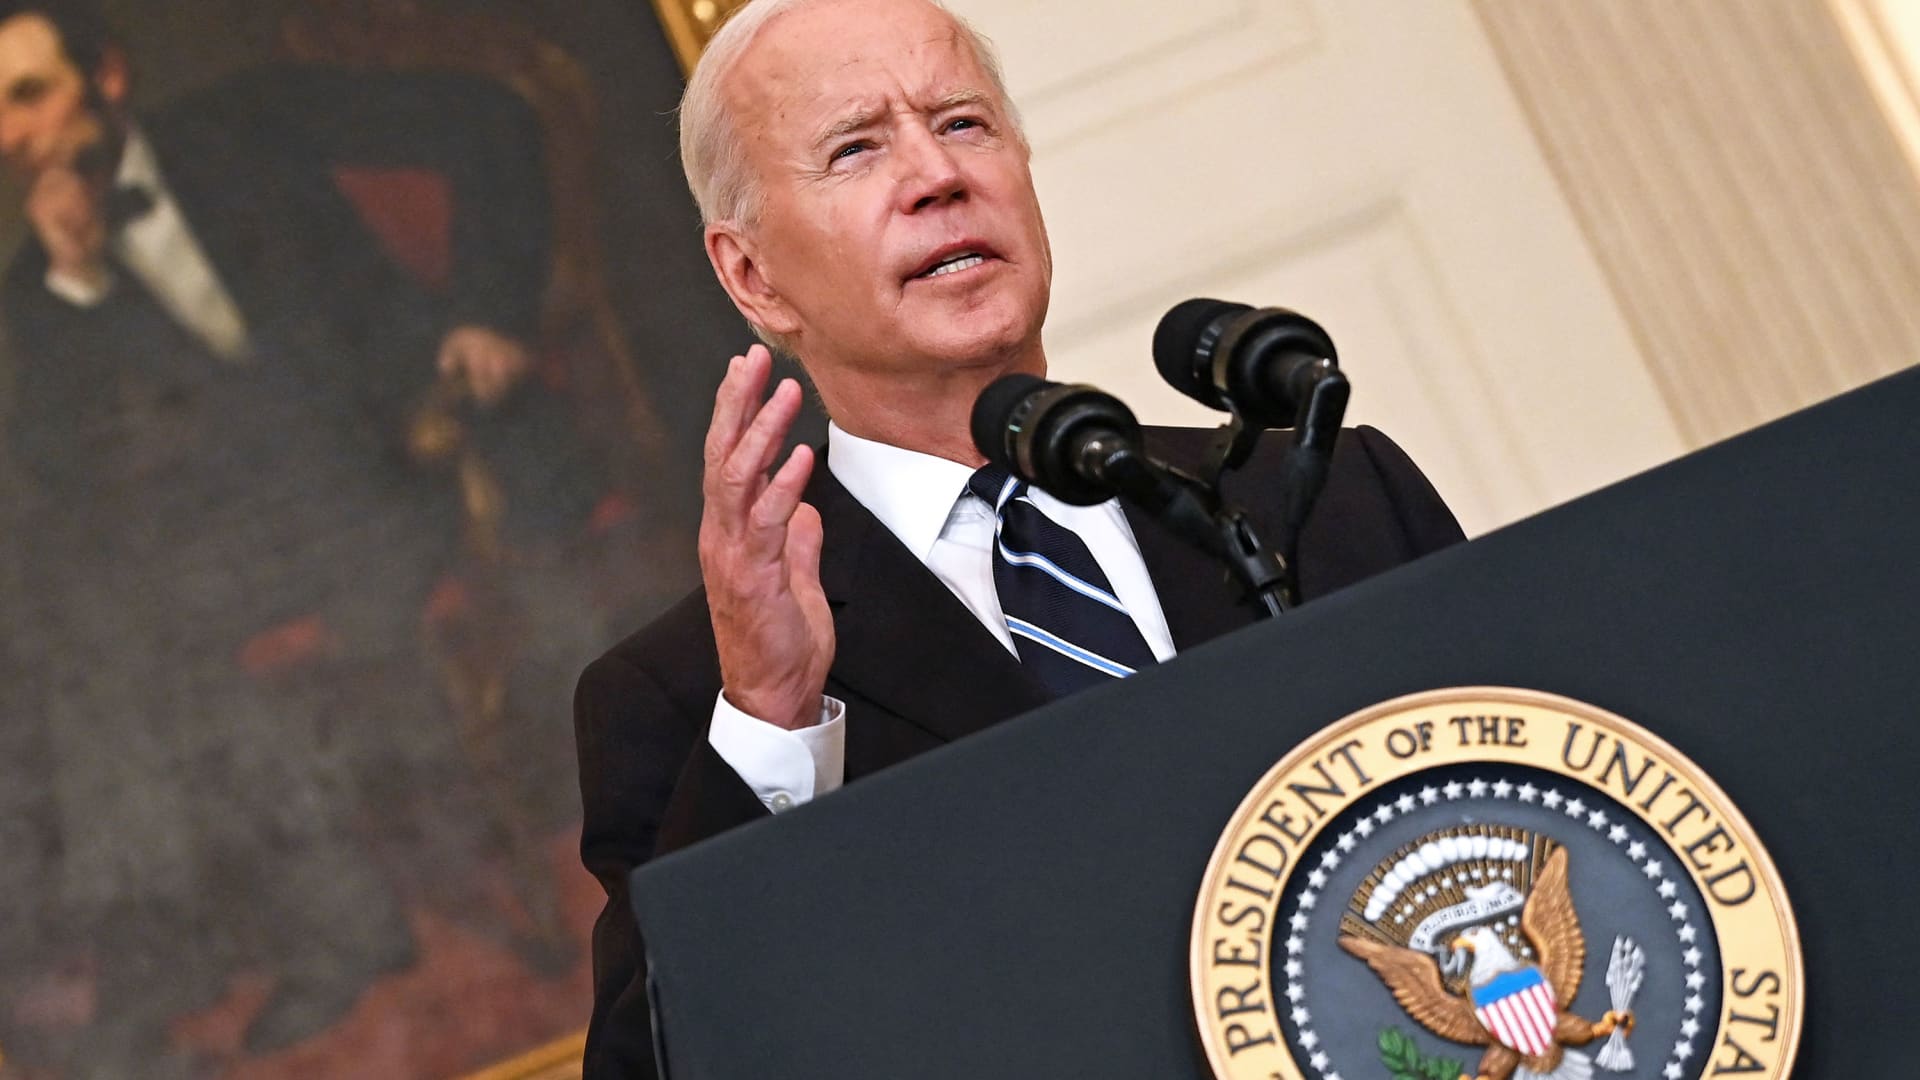 US President Joe Biden delivers remarks on plans to stop the spread of the Delta variant and boost Covid-19 vaccinations at the State Dinning Room of the White House, in Washington, DC on September 9, 2021.